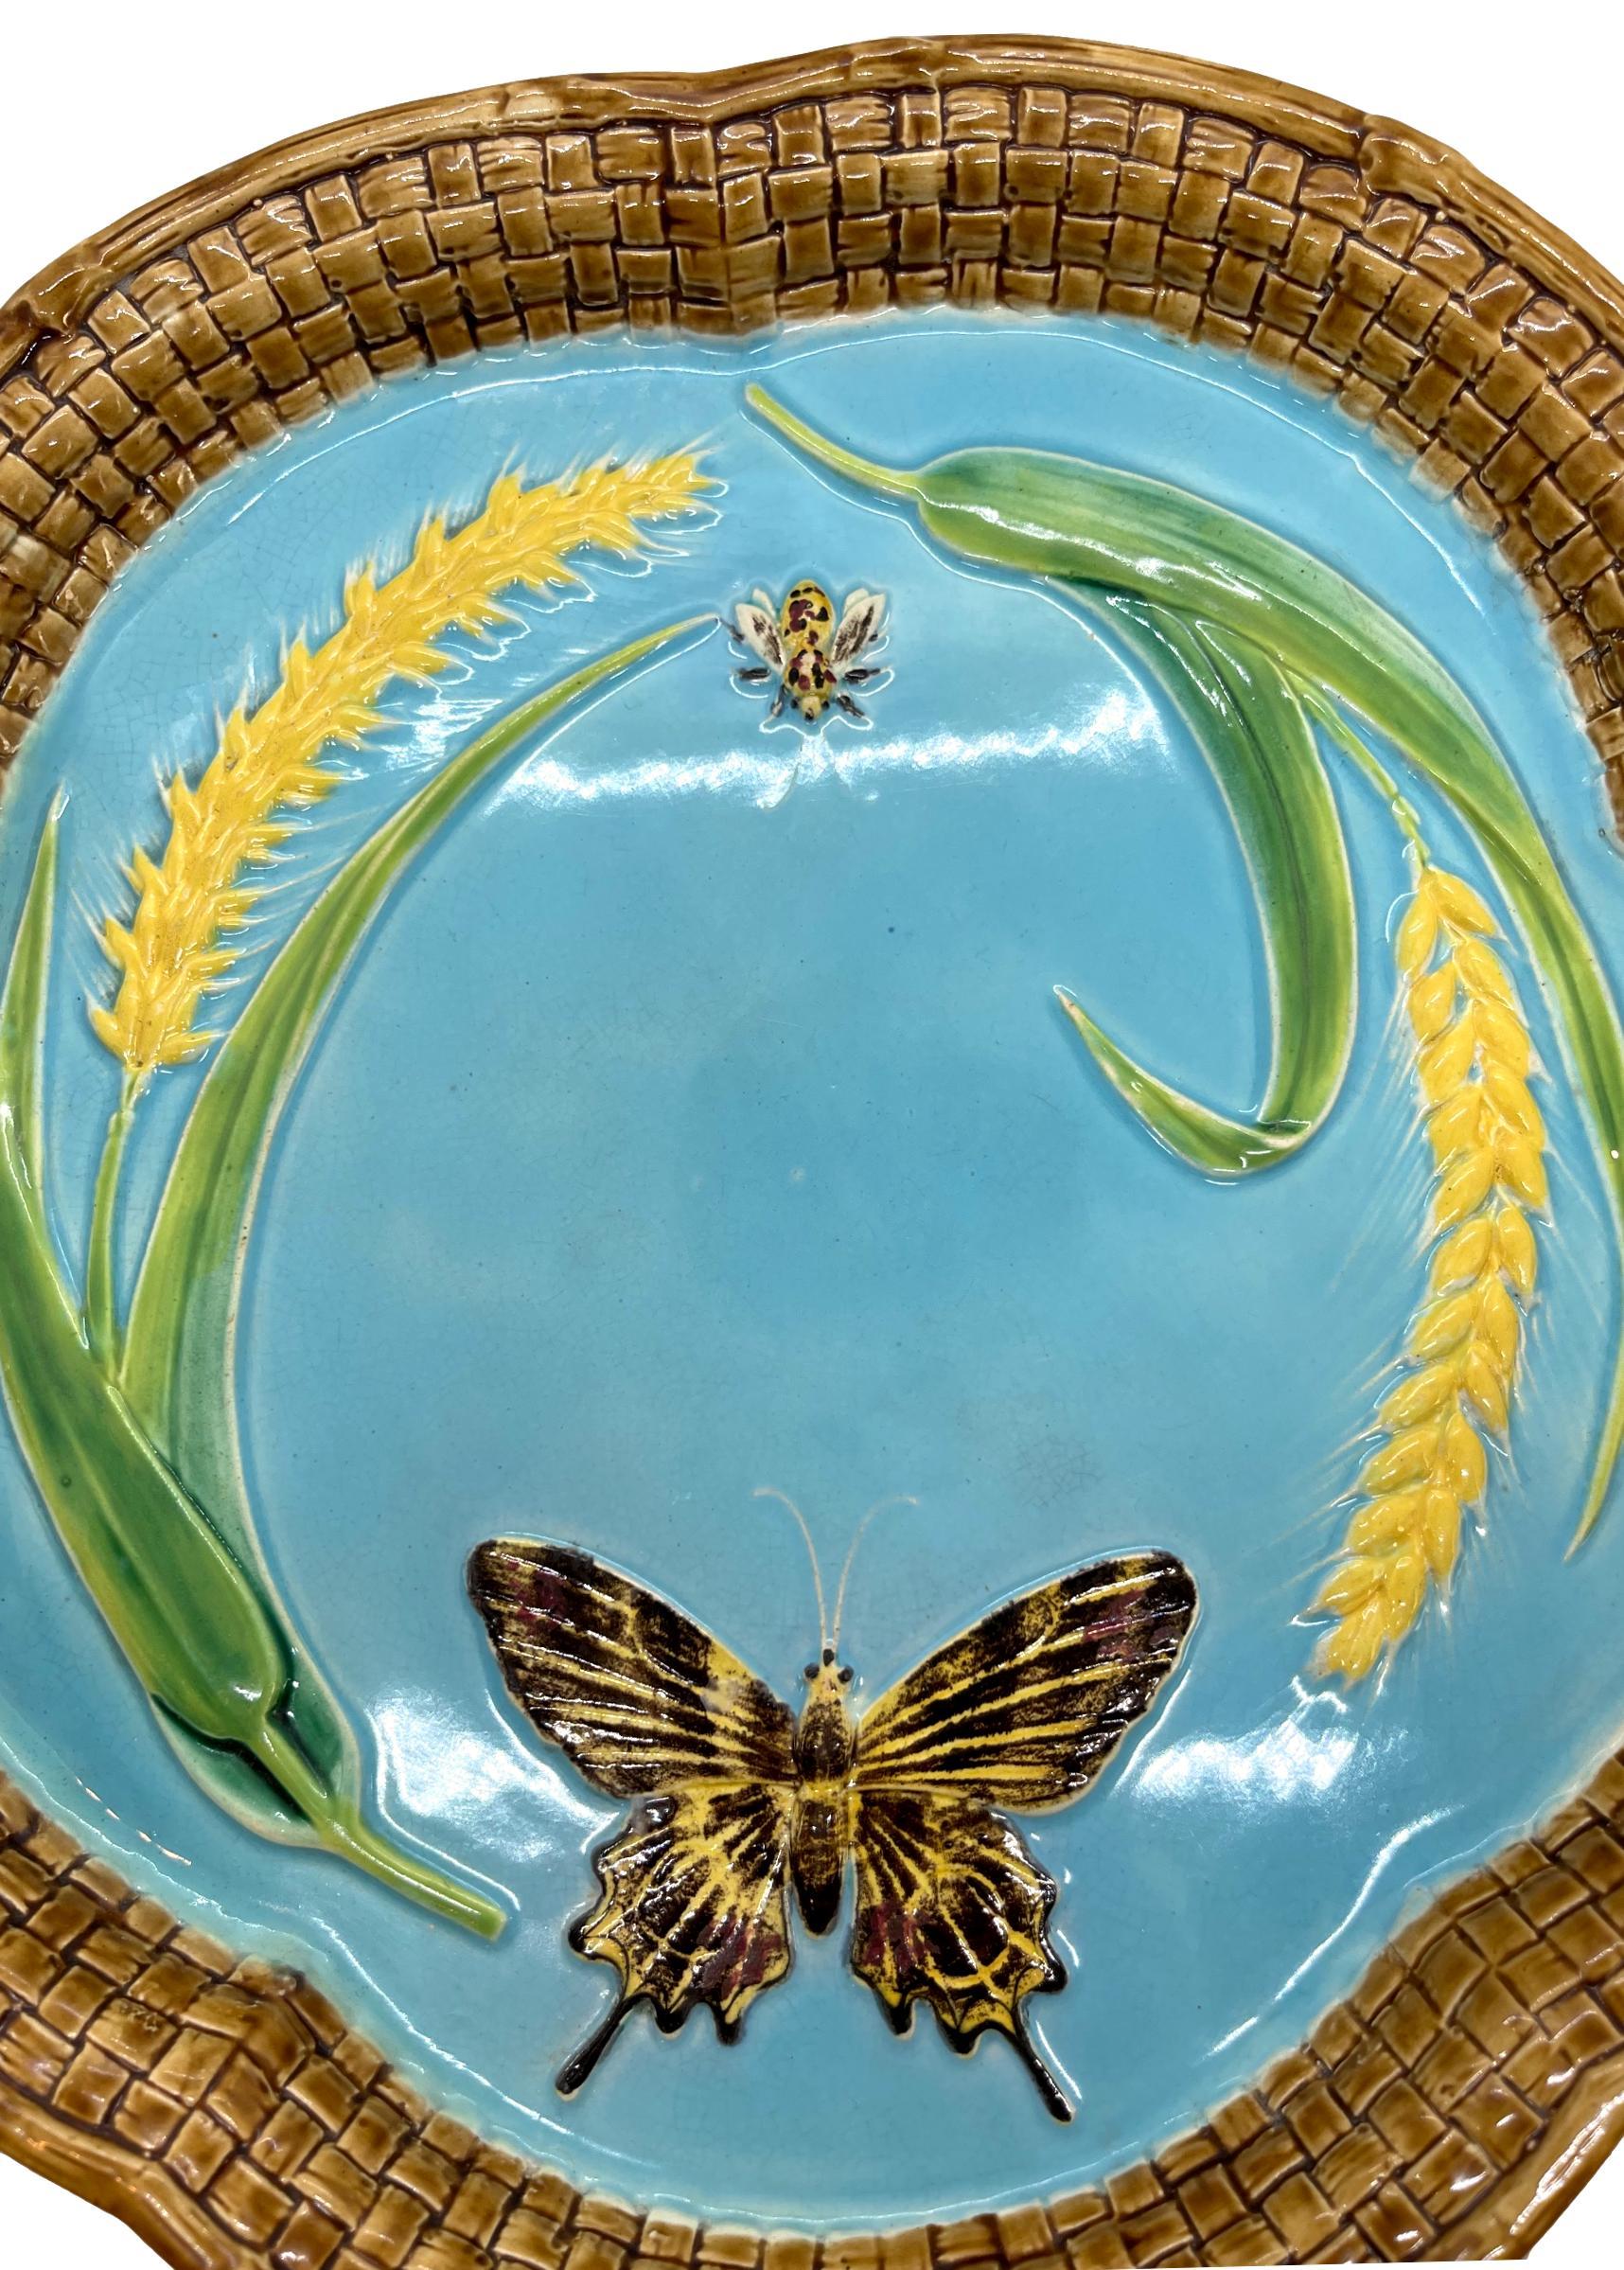 Victorian George Jones Majolica Bread Platter, with Butterfly, Bee, and Wheat, Dated 1877